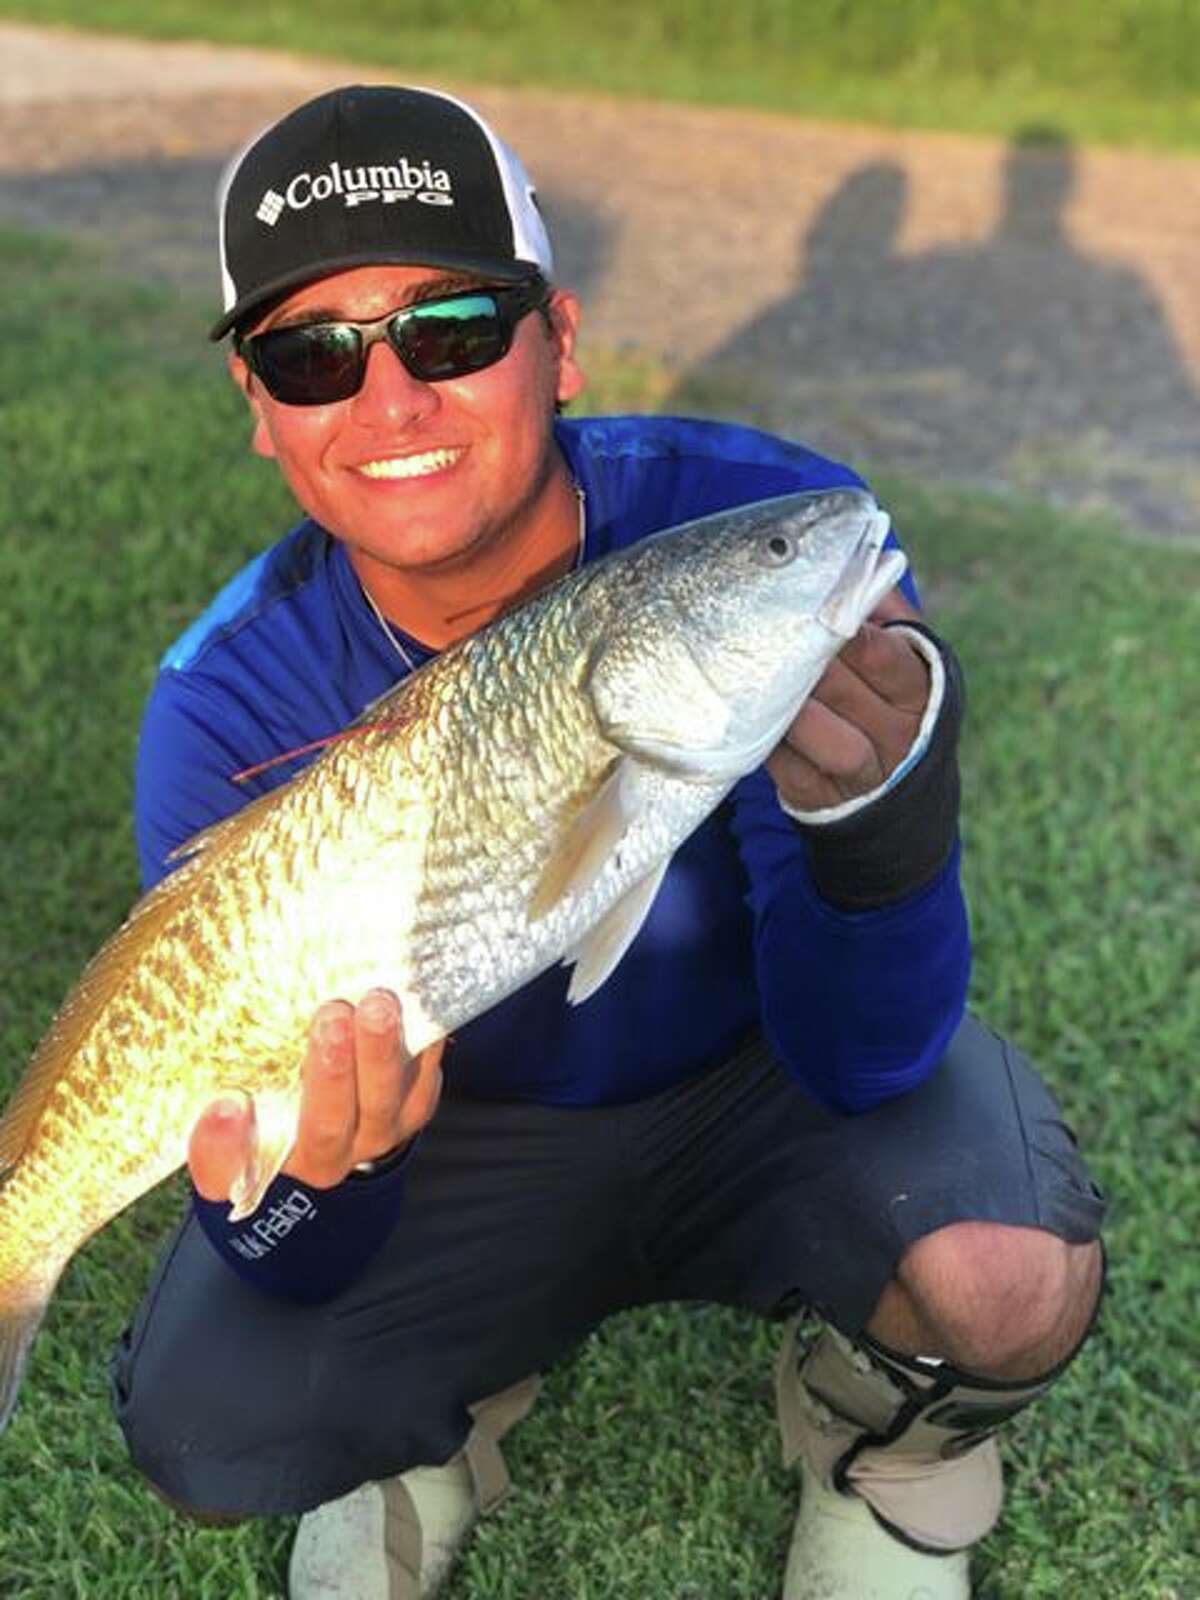 Dom Lopez, 19, of Corpus Christi landed the first tagged redfish of the 2019 STAR Tournament.